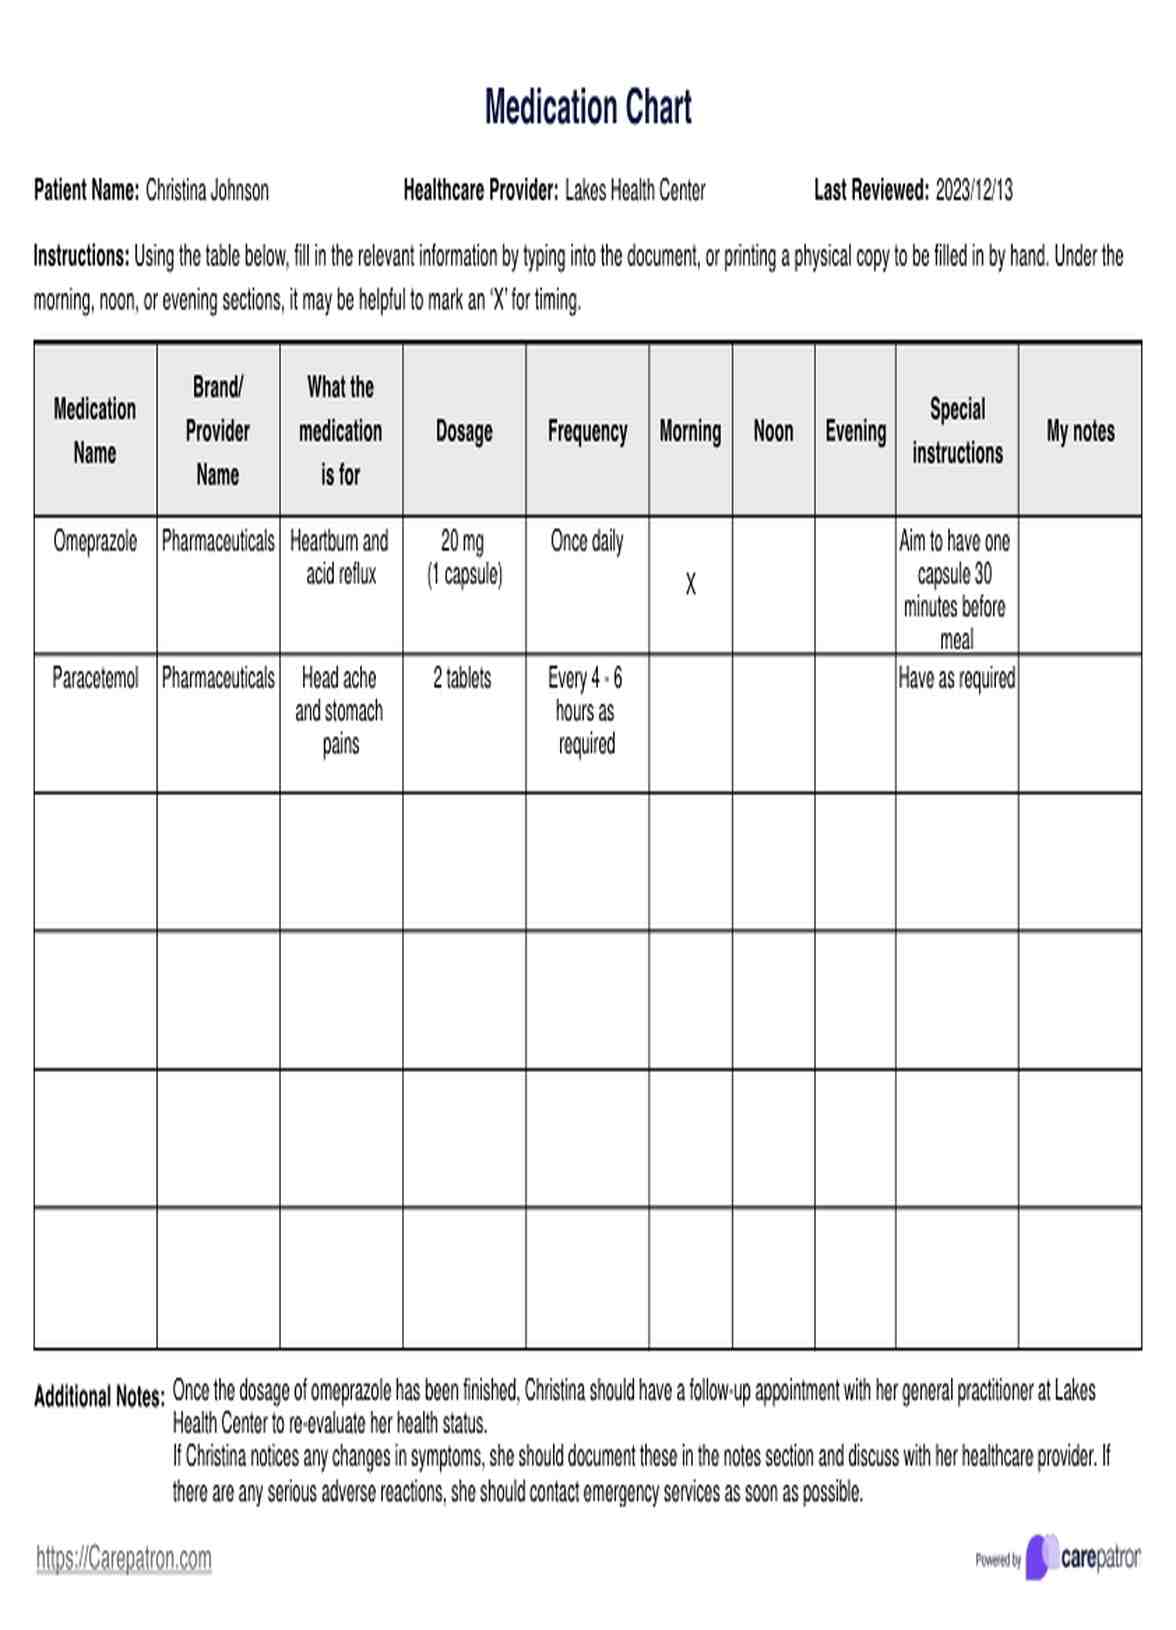 Medication Chart Template PDF Example